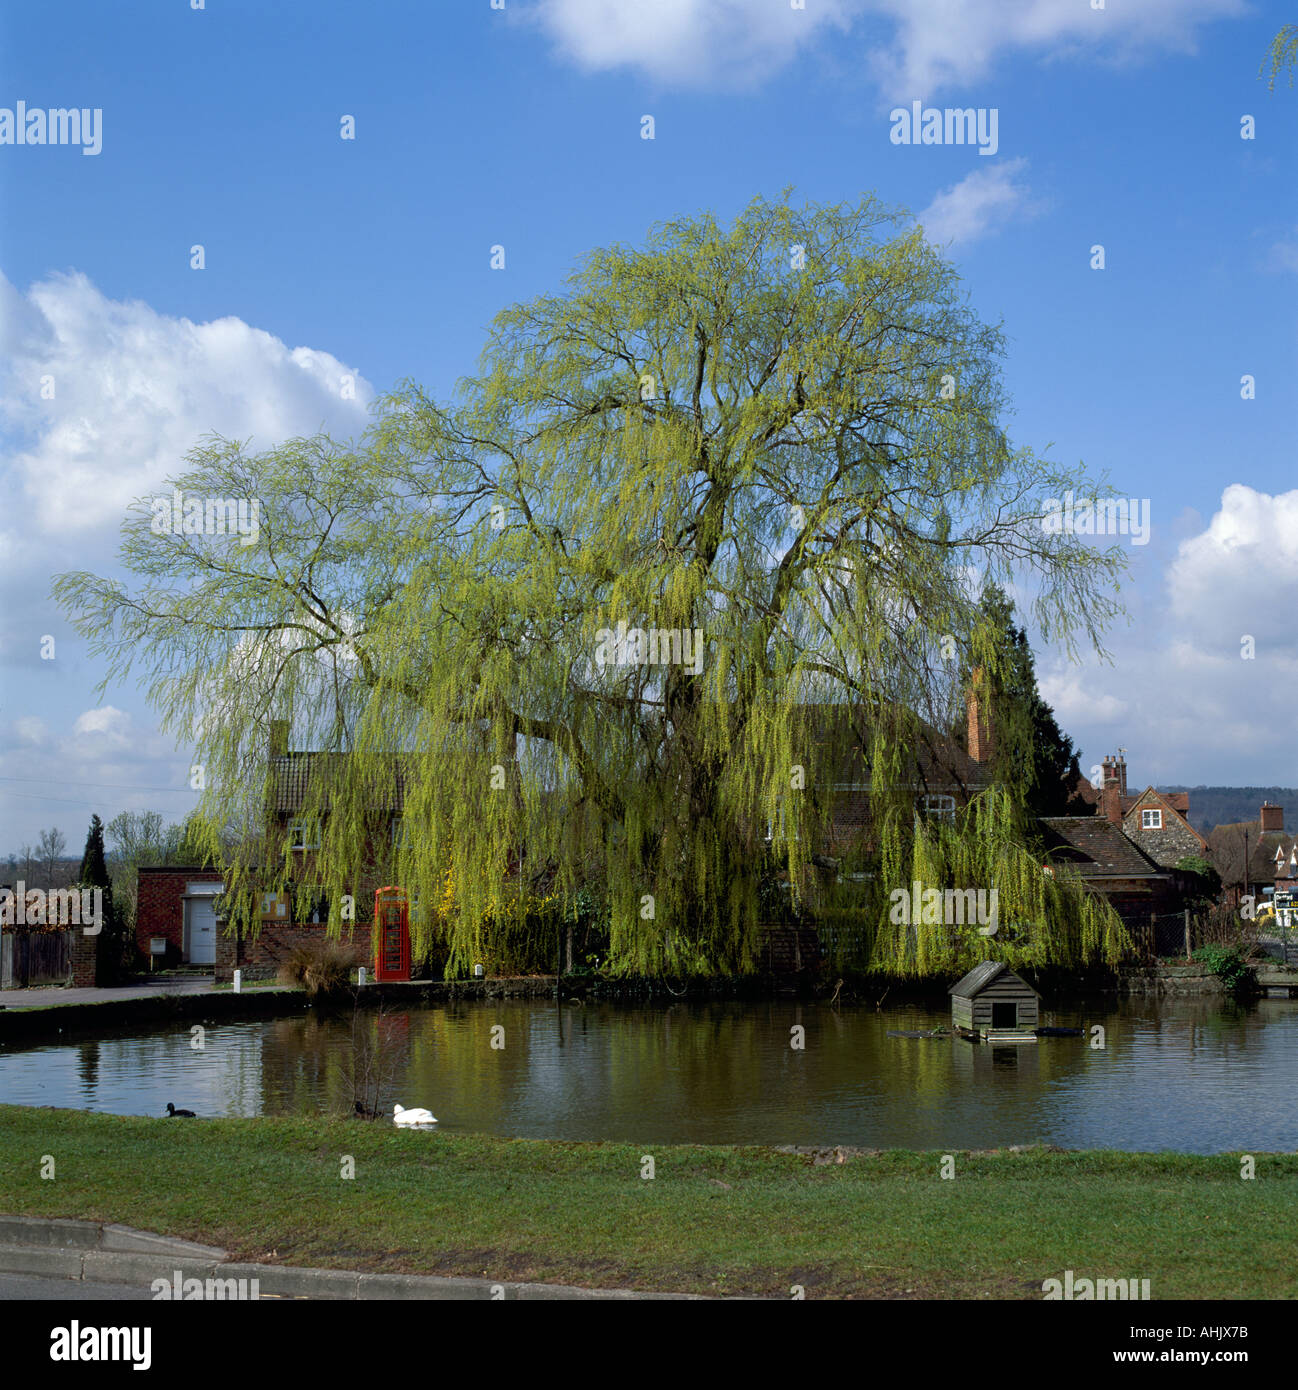 Willow tree in fresh spring green foliage by village pond at Otford, Kent, England, UK Stock Photo